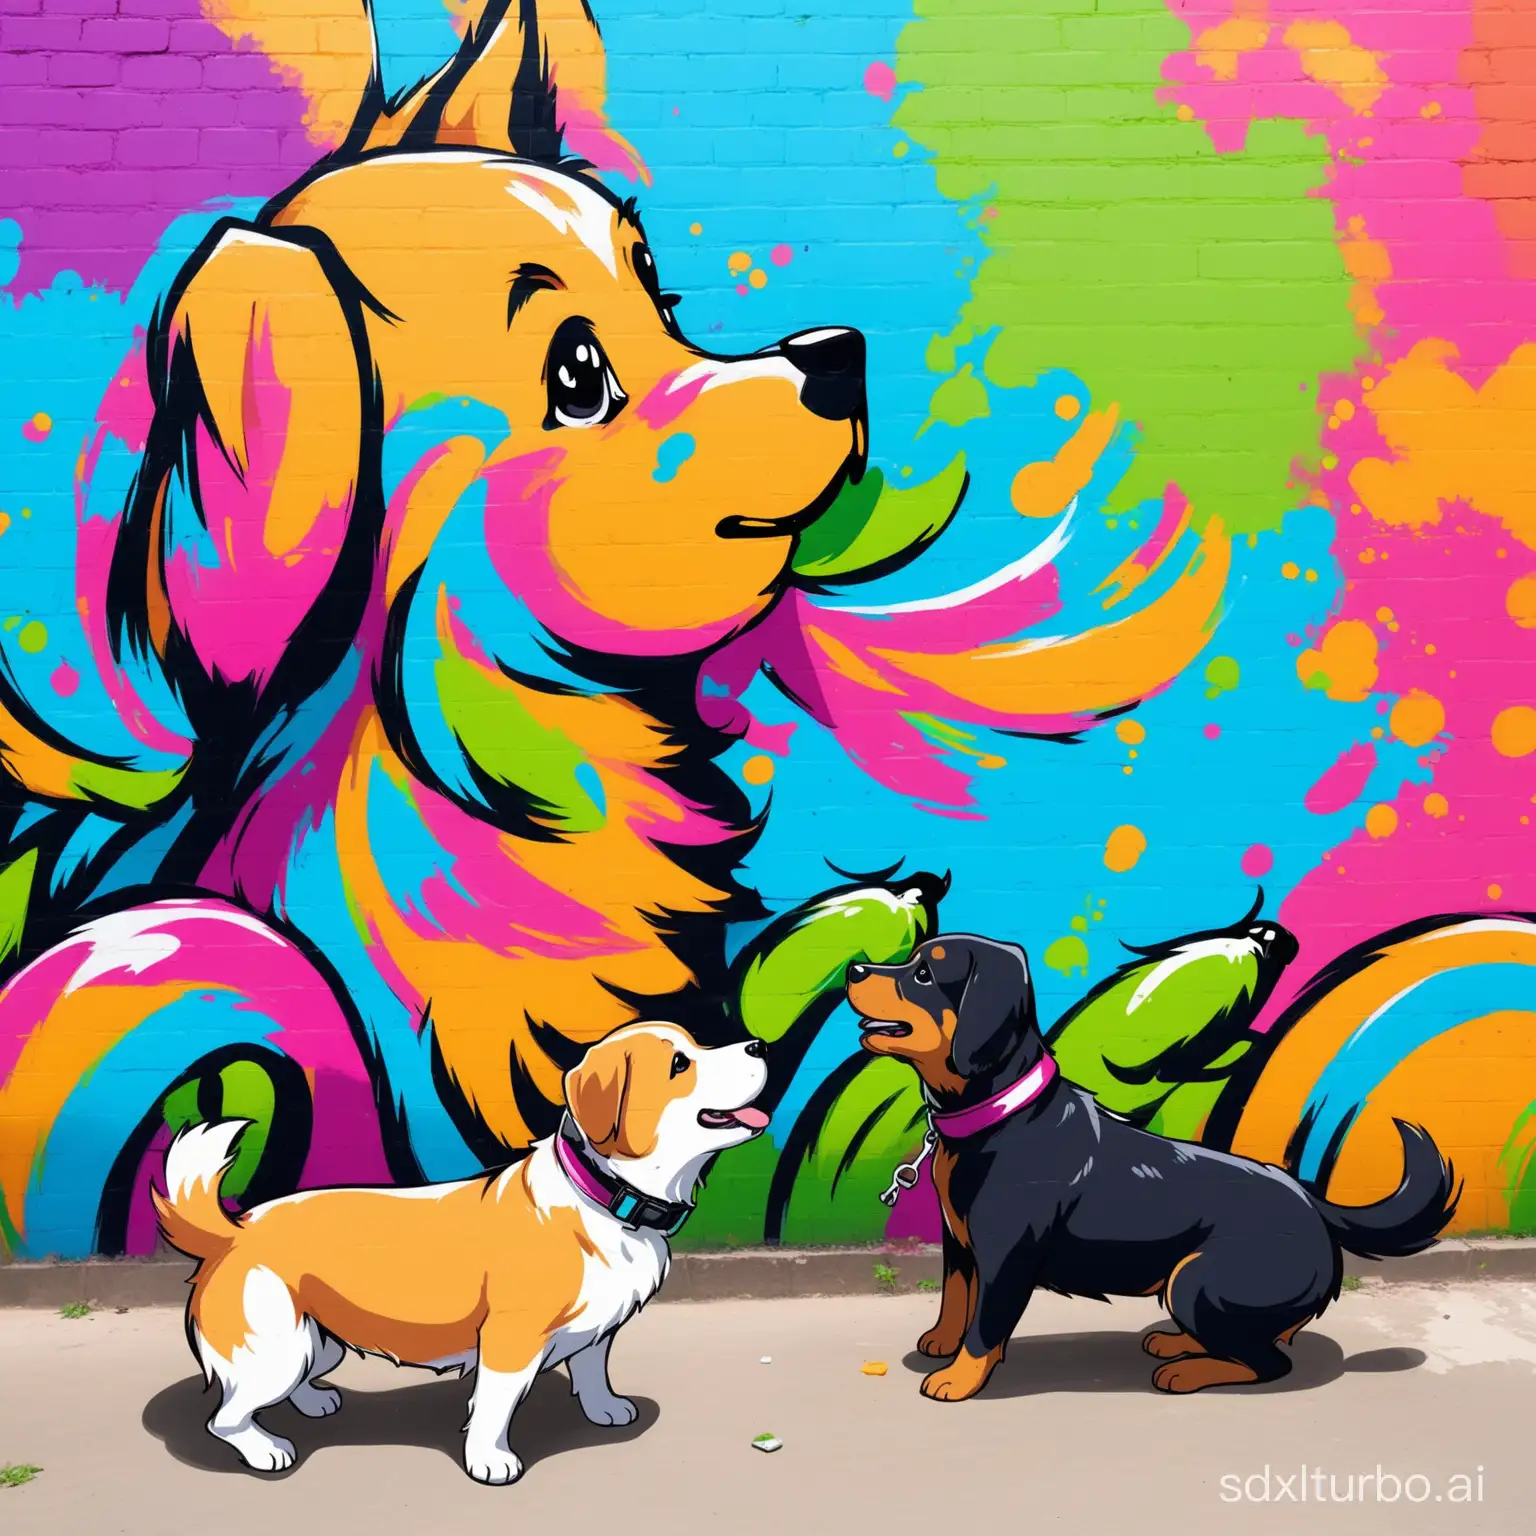 Draw a professional and colorful graffiti with nature and dogs playing happily